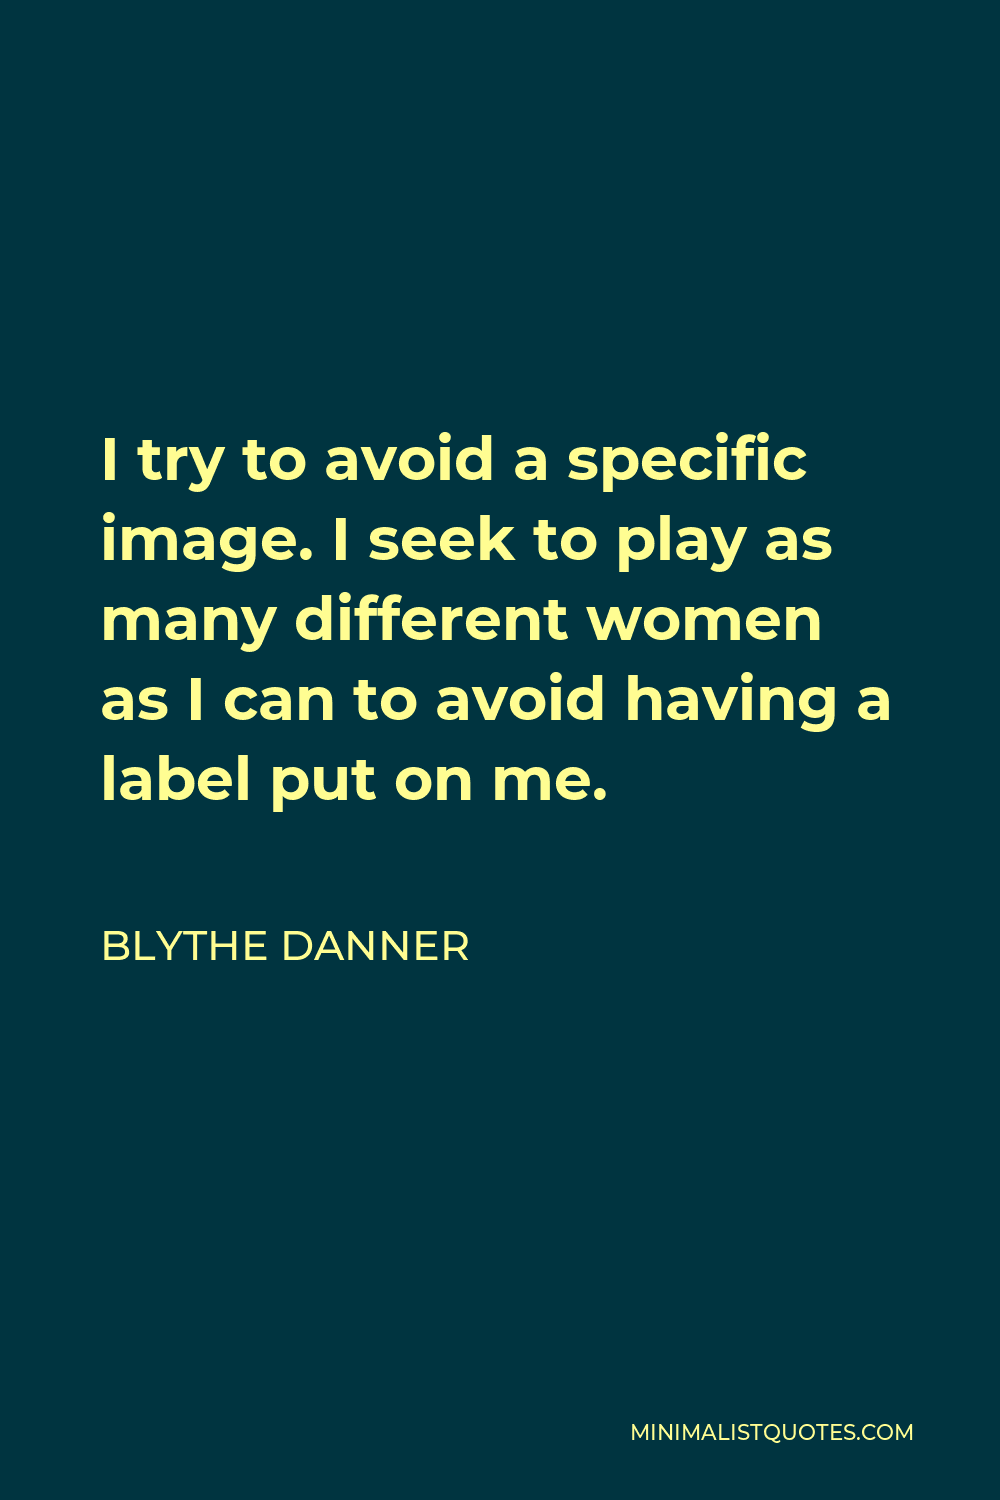 Blythe Danner Quote - I try to avoid a specific image. I seek to play as many different women as I can to avoid having a label put on me.